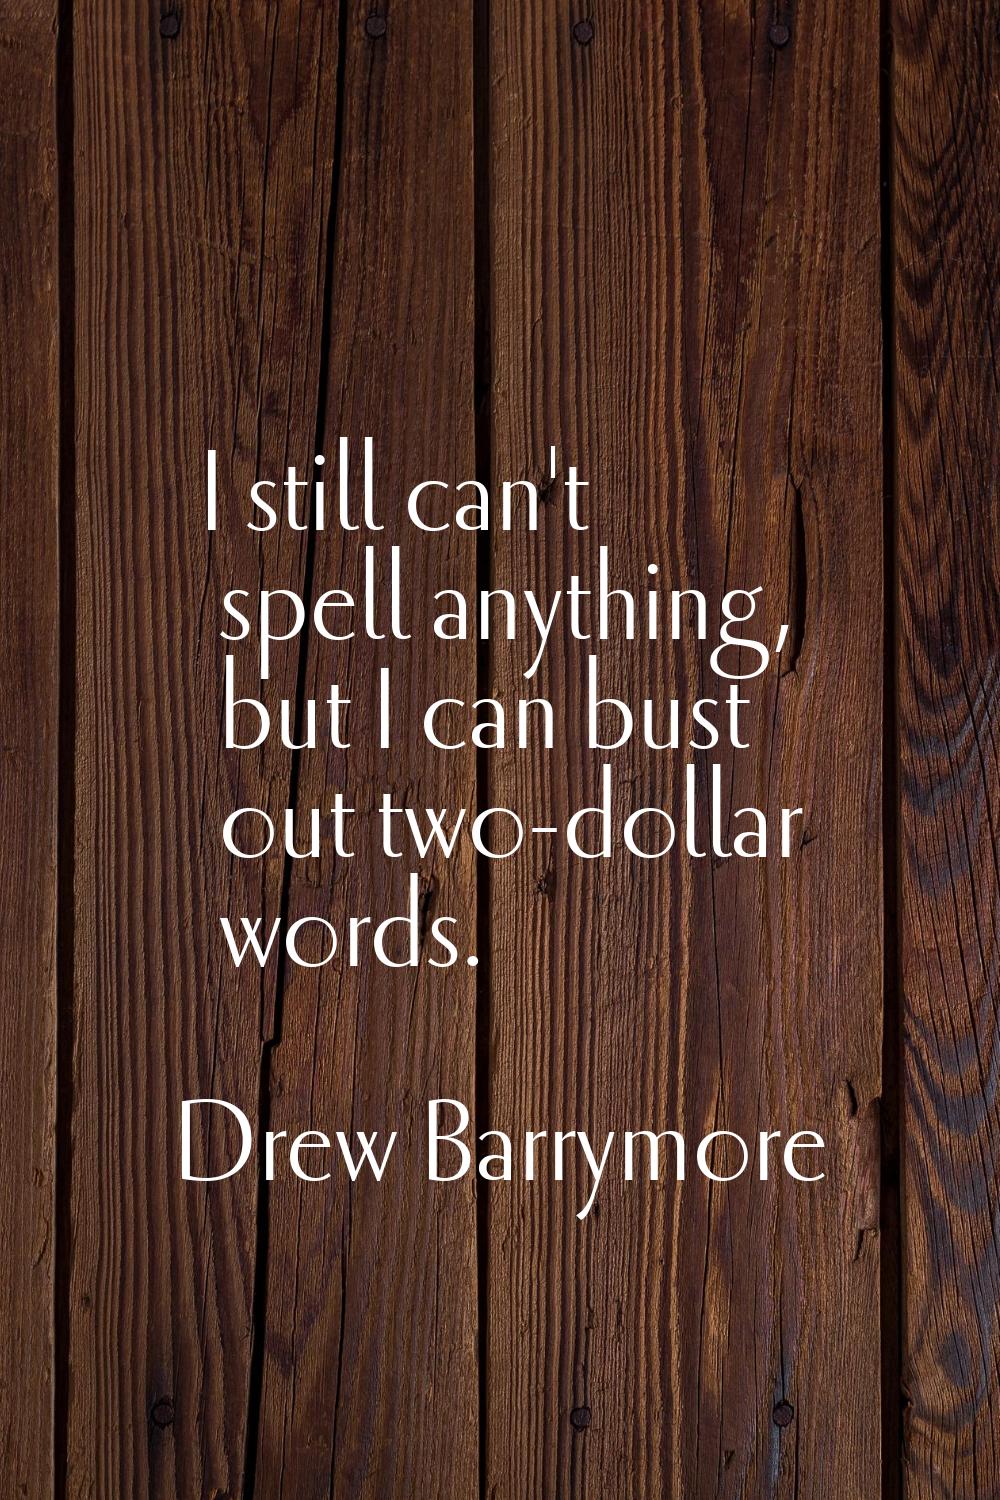 I still can't spell anything, but I can bust out two-dollar words.